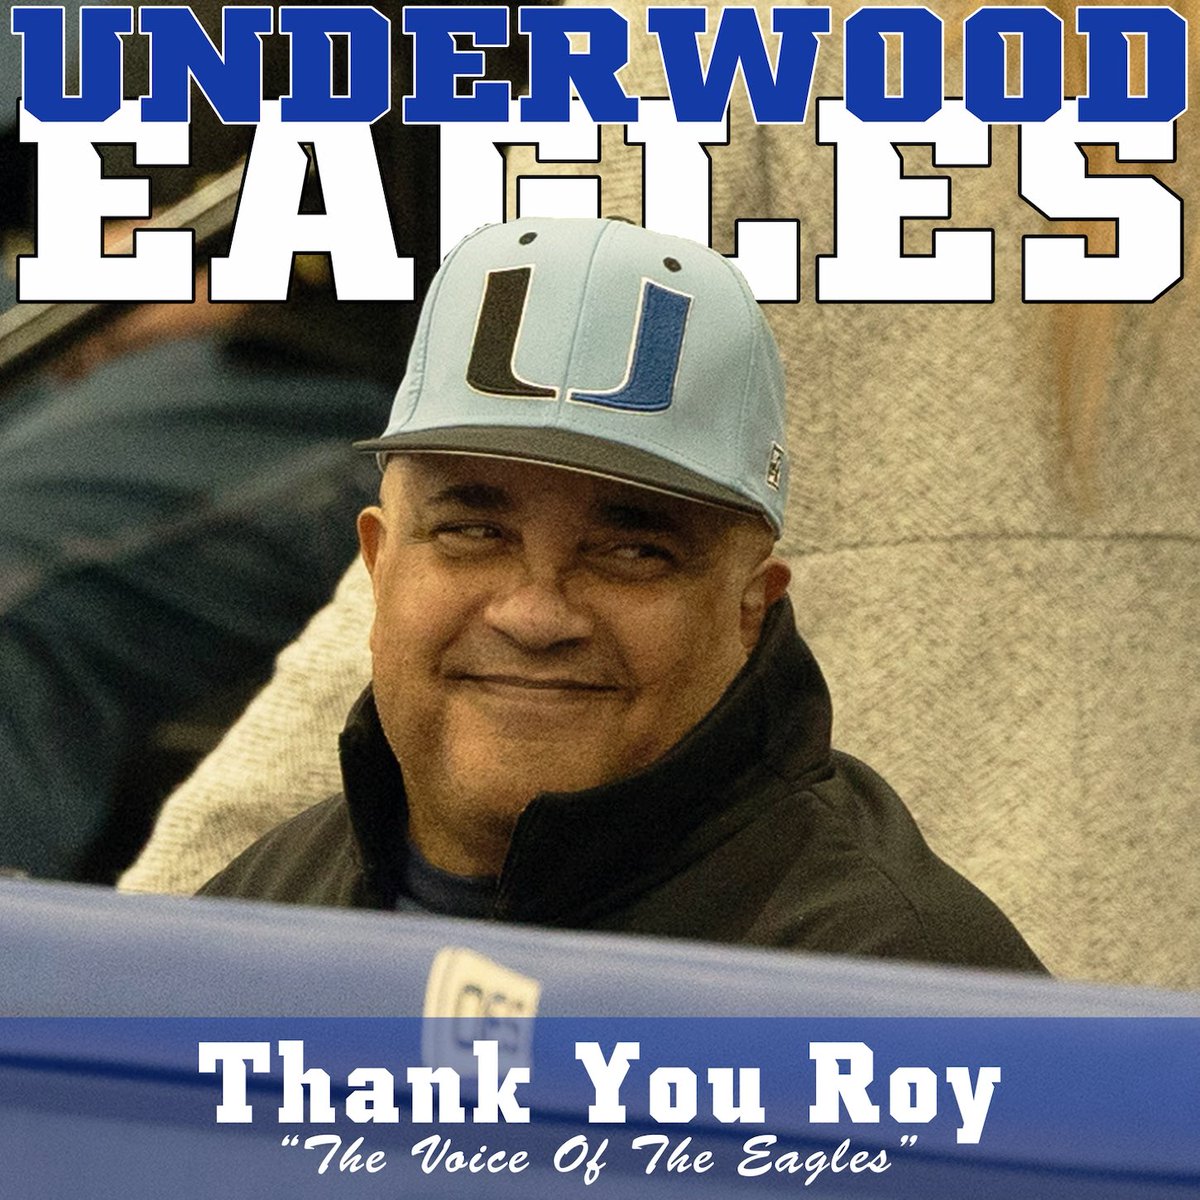 Roy’s announcing was a great addition to our home atmosphere! We are going to miss him!